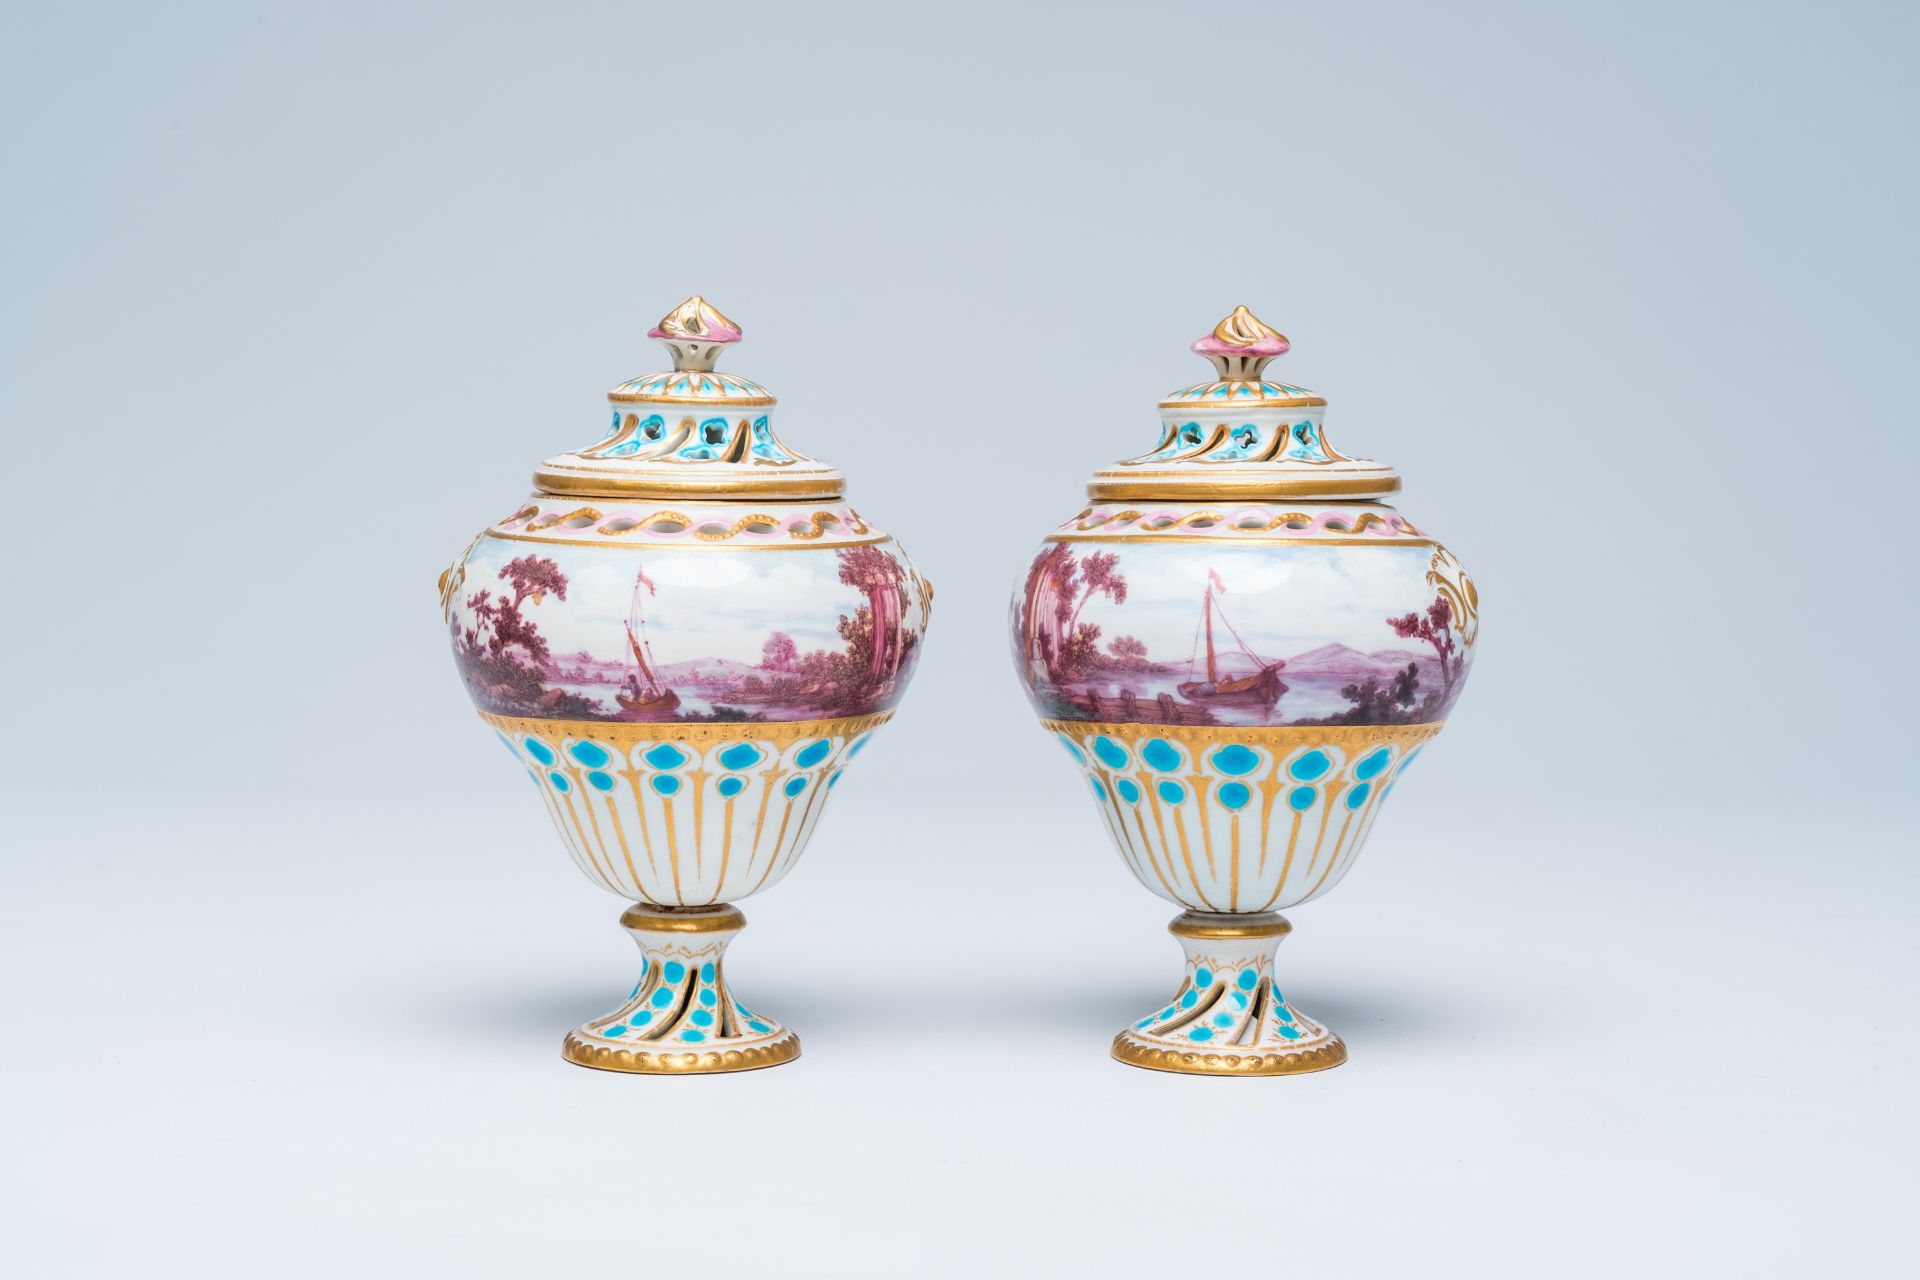 A pair of polychrome and gilt pot-pourri vases and covers in the Tournai manner with a landscape all